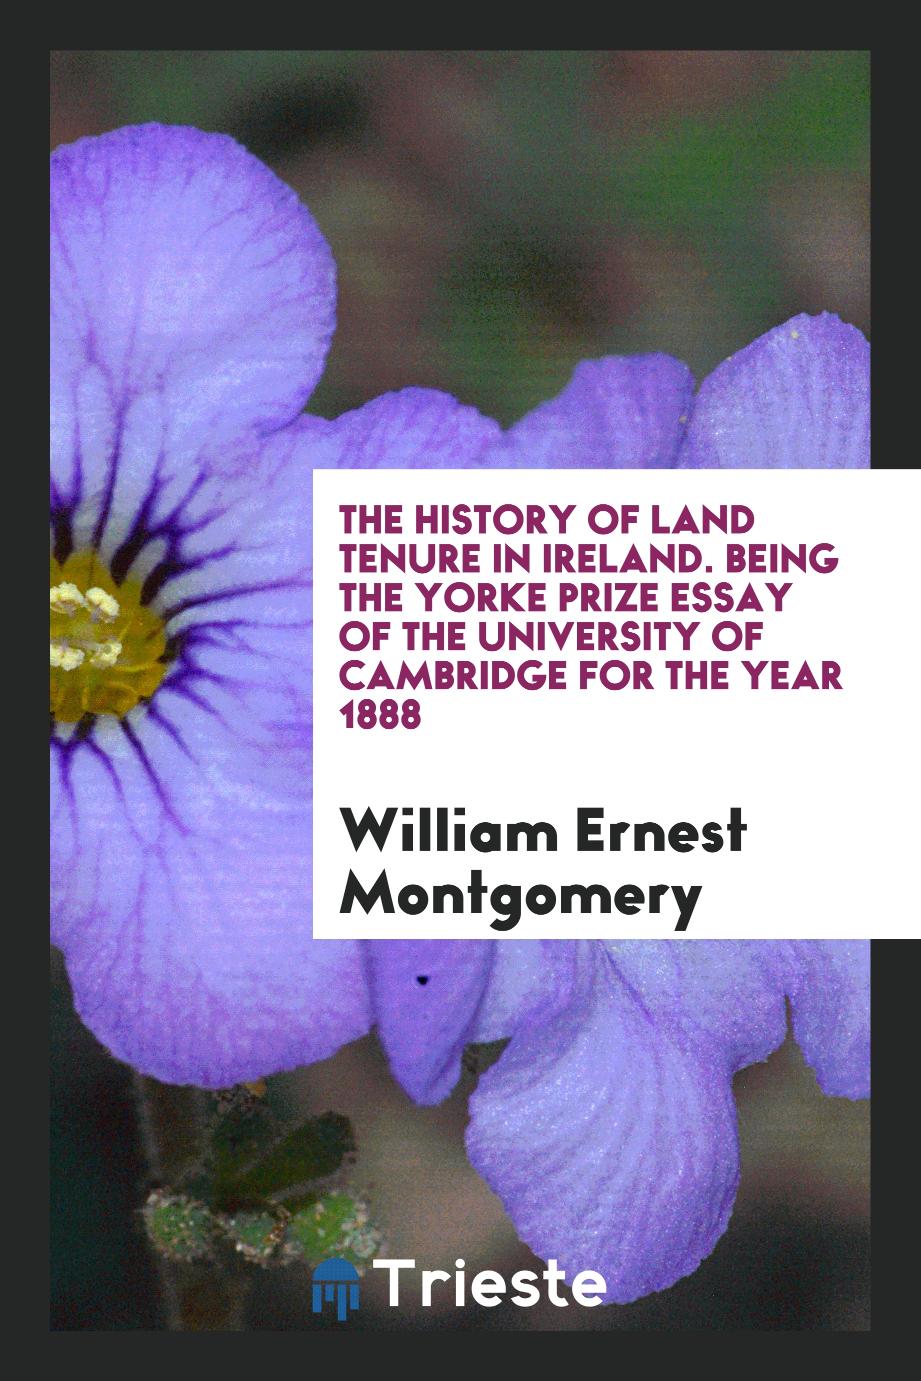 The History of Land Tenure in Ireland. Being the Yorke Prize Essay of the University of Cambridge for the Year 1888